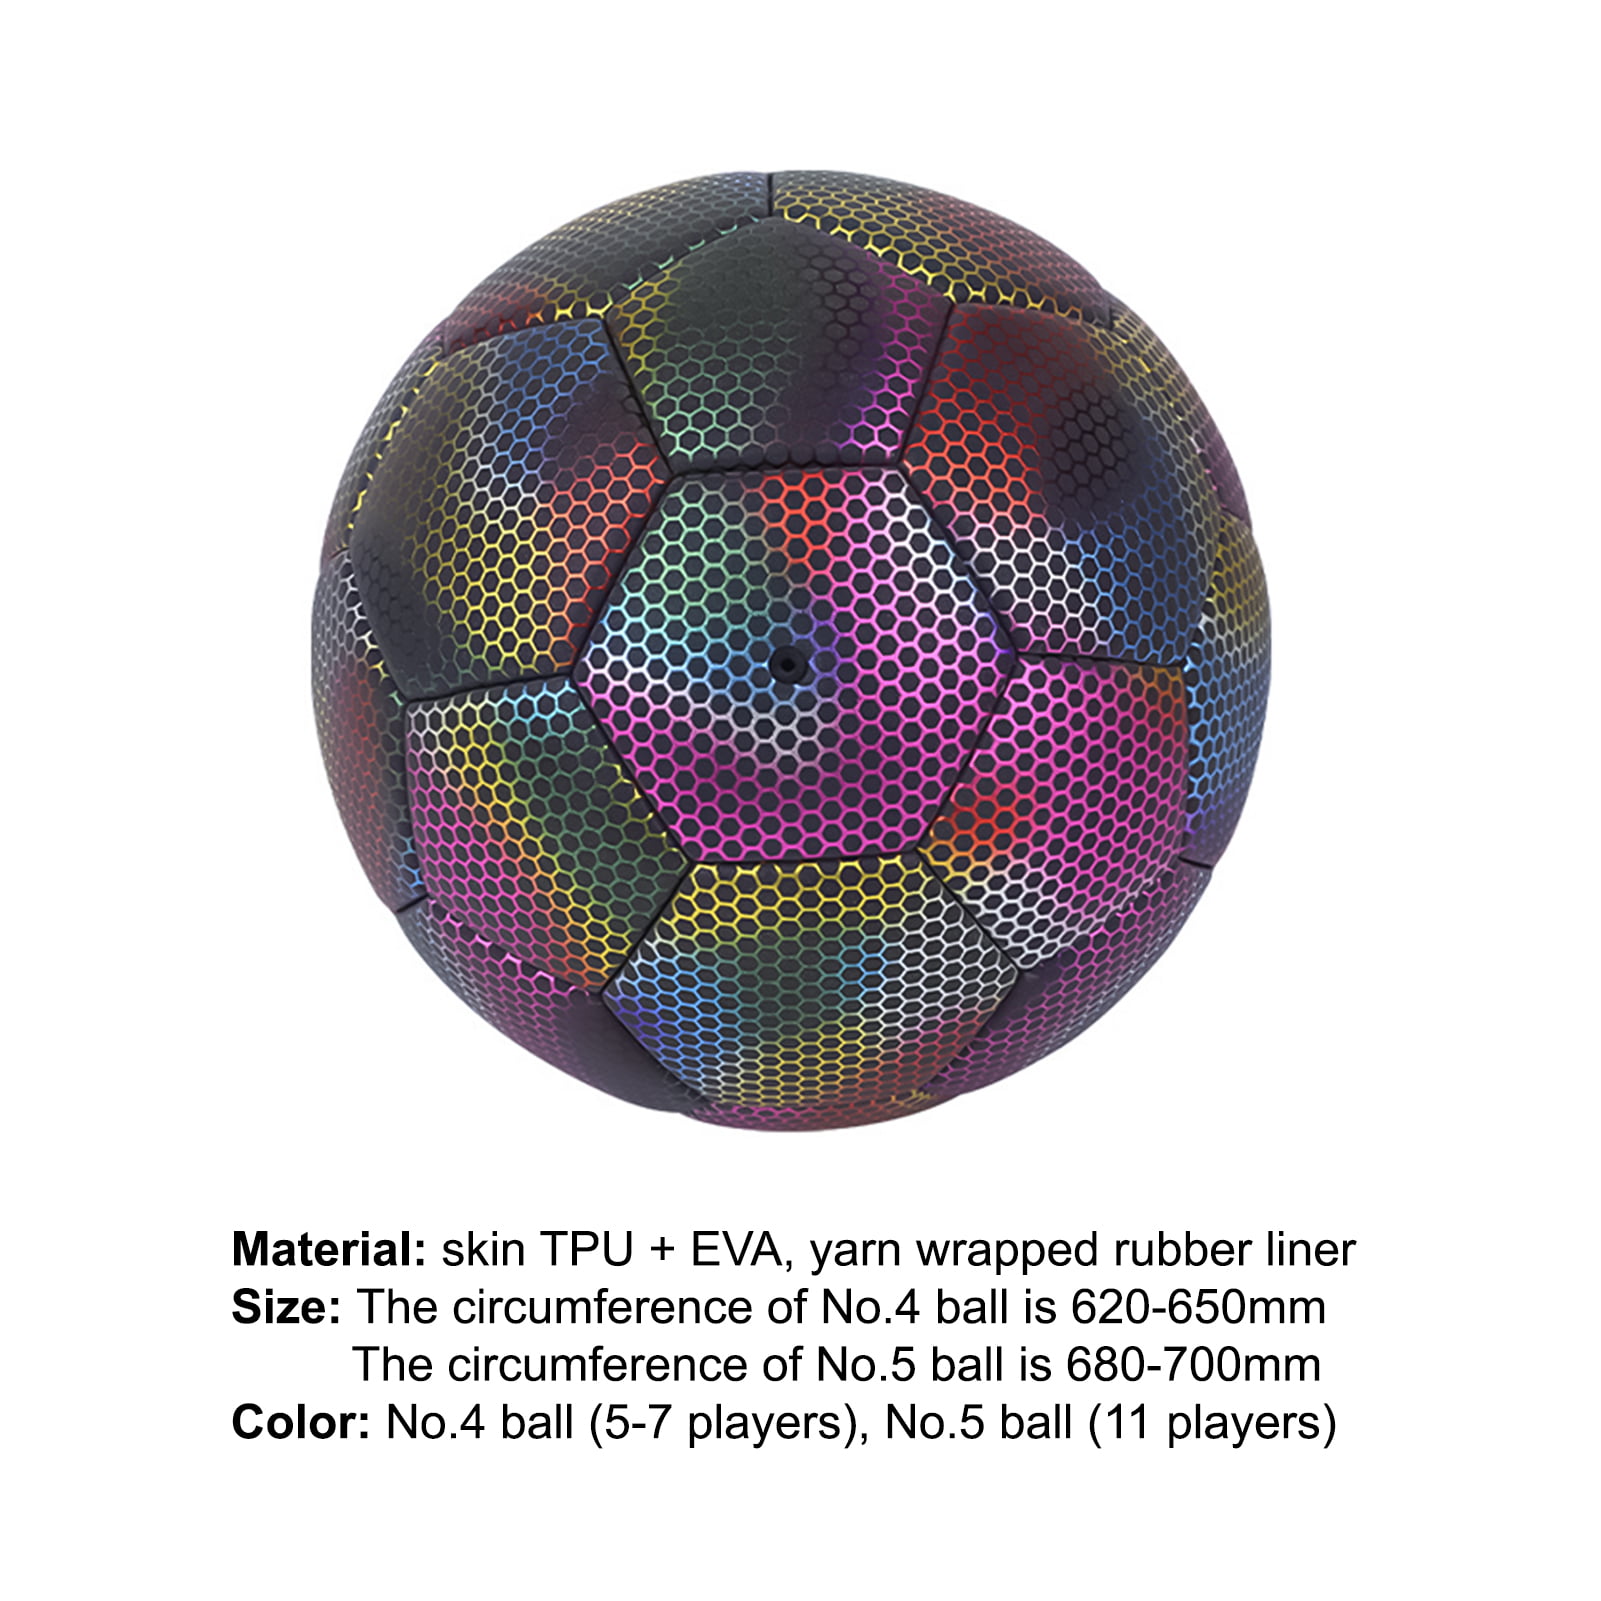 Visland Holographic Luminous Soccer Ball for Night Games & Training, Glowing  in The Dark Light Up Reflective with Camera Flash Reflects Light Toy Gifts  for Boys, Kids, & Men - Walmart.com